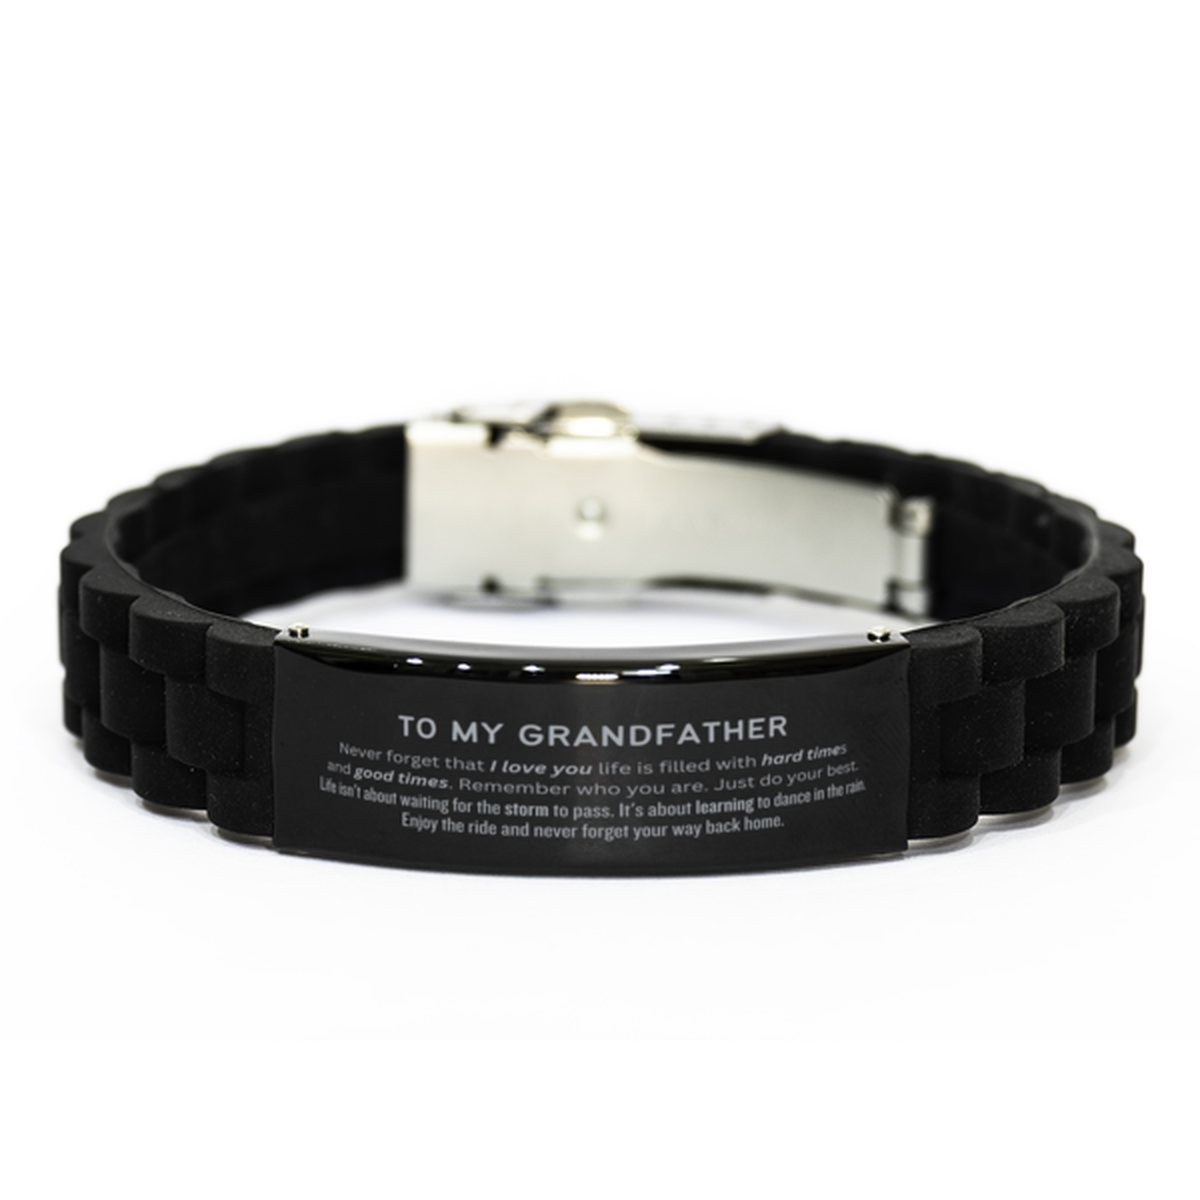 Christmas Grandfather Black Glidelock Clasp Bracelet Gifts, To My Grandfather Birthday Thank You Gifts For Grandfather, Graduation Unique Gifts For Grandfather To My Grandfather Never forget that I love you life is filled with hard times and good times. R